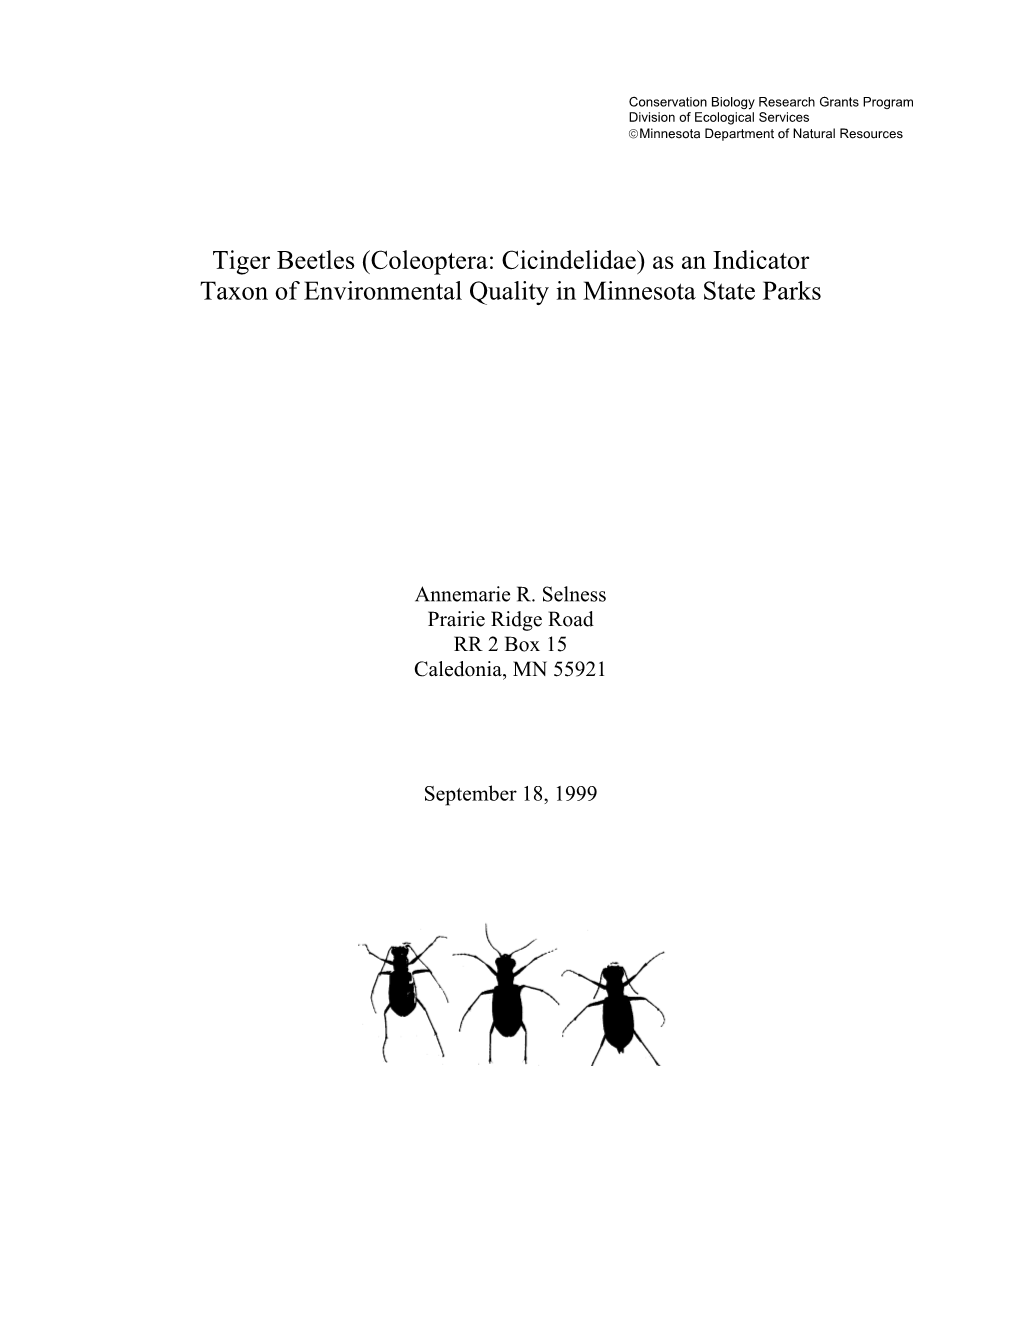 Tiger Beetles (Coleoptera: Cicindelidae) As an Indicator Taxon of Environmental Quality in Minnesota State Parks